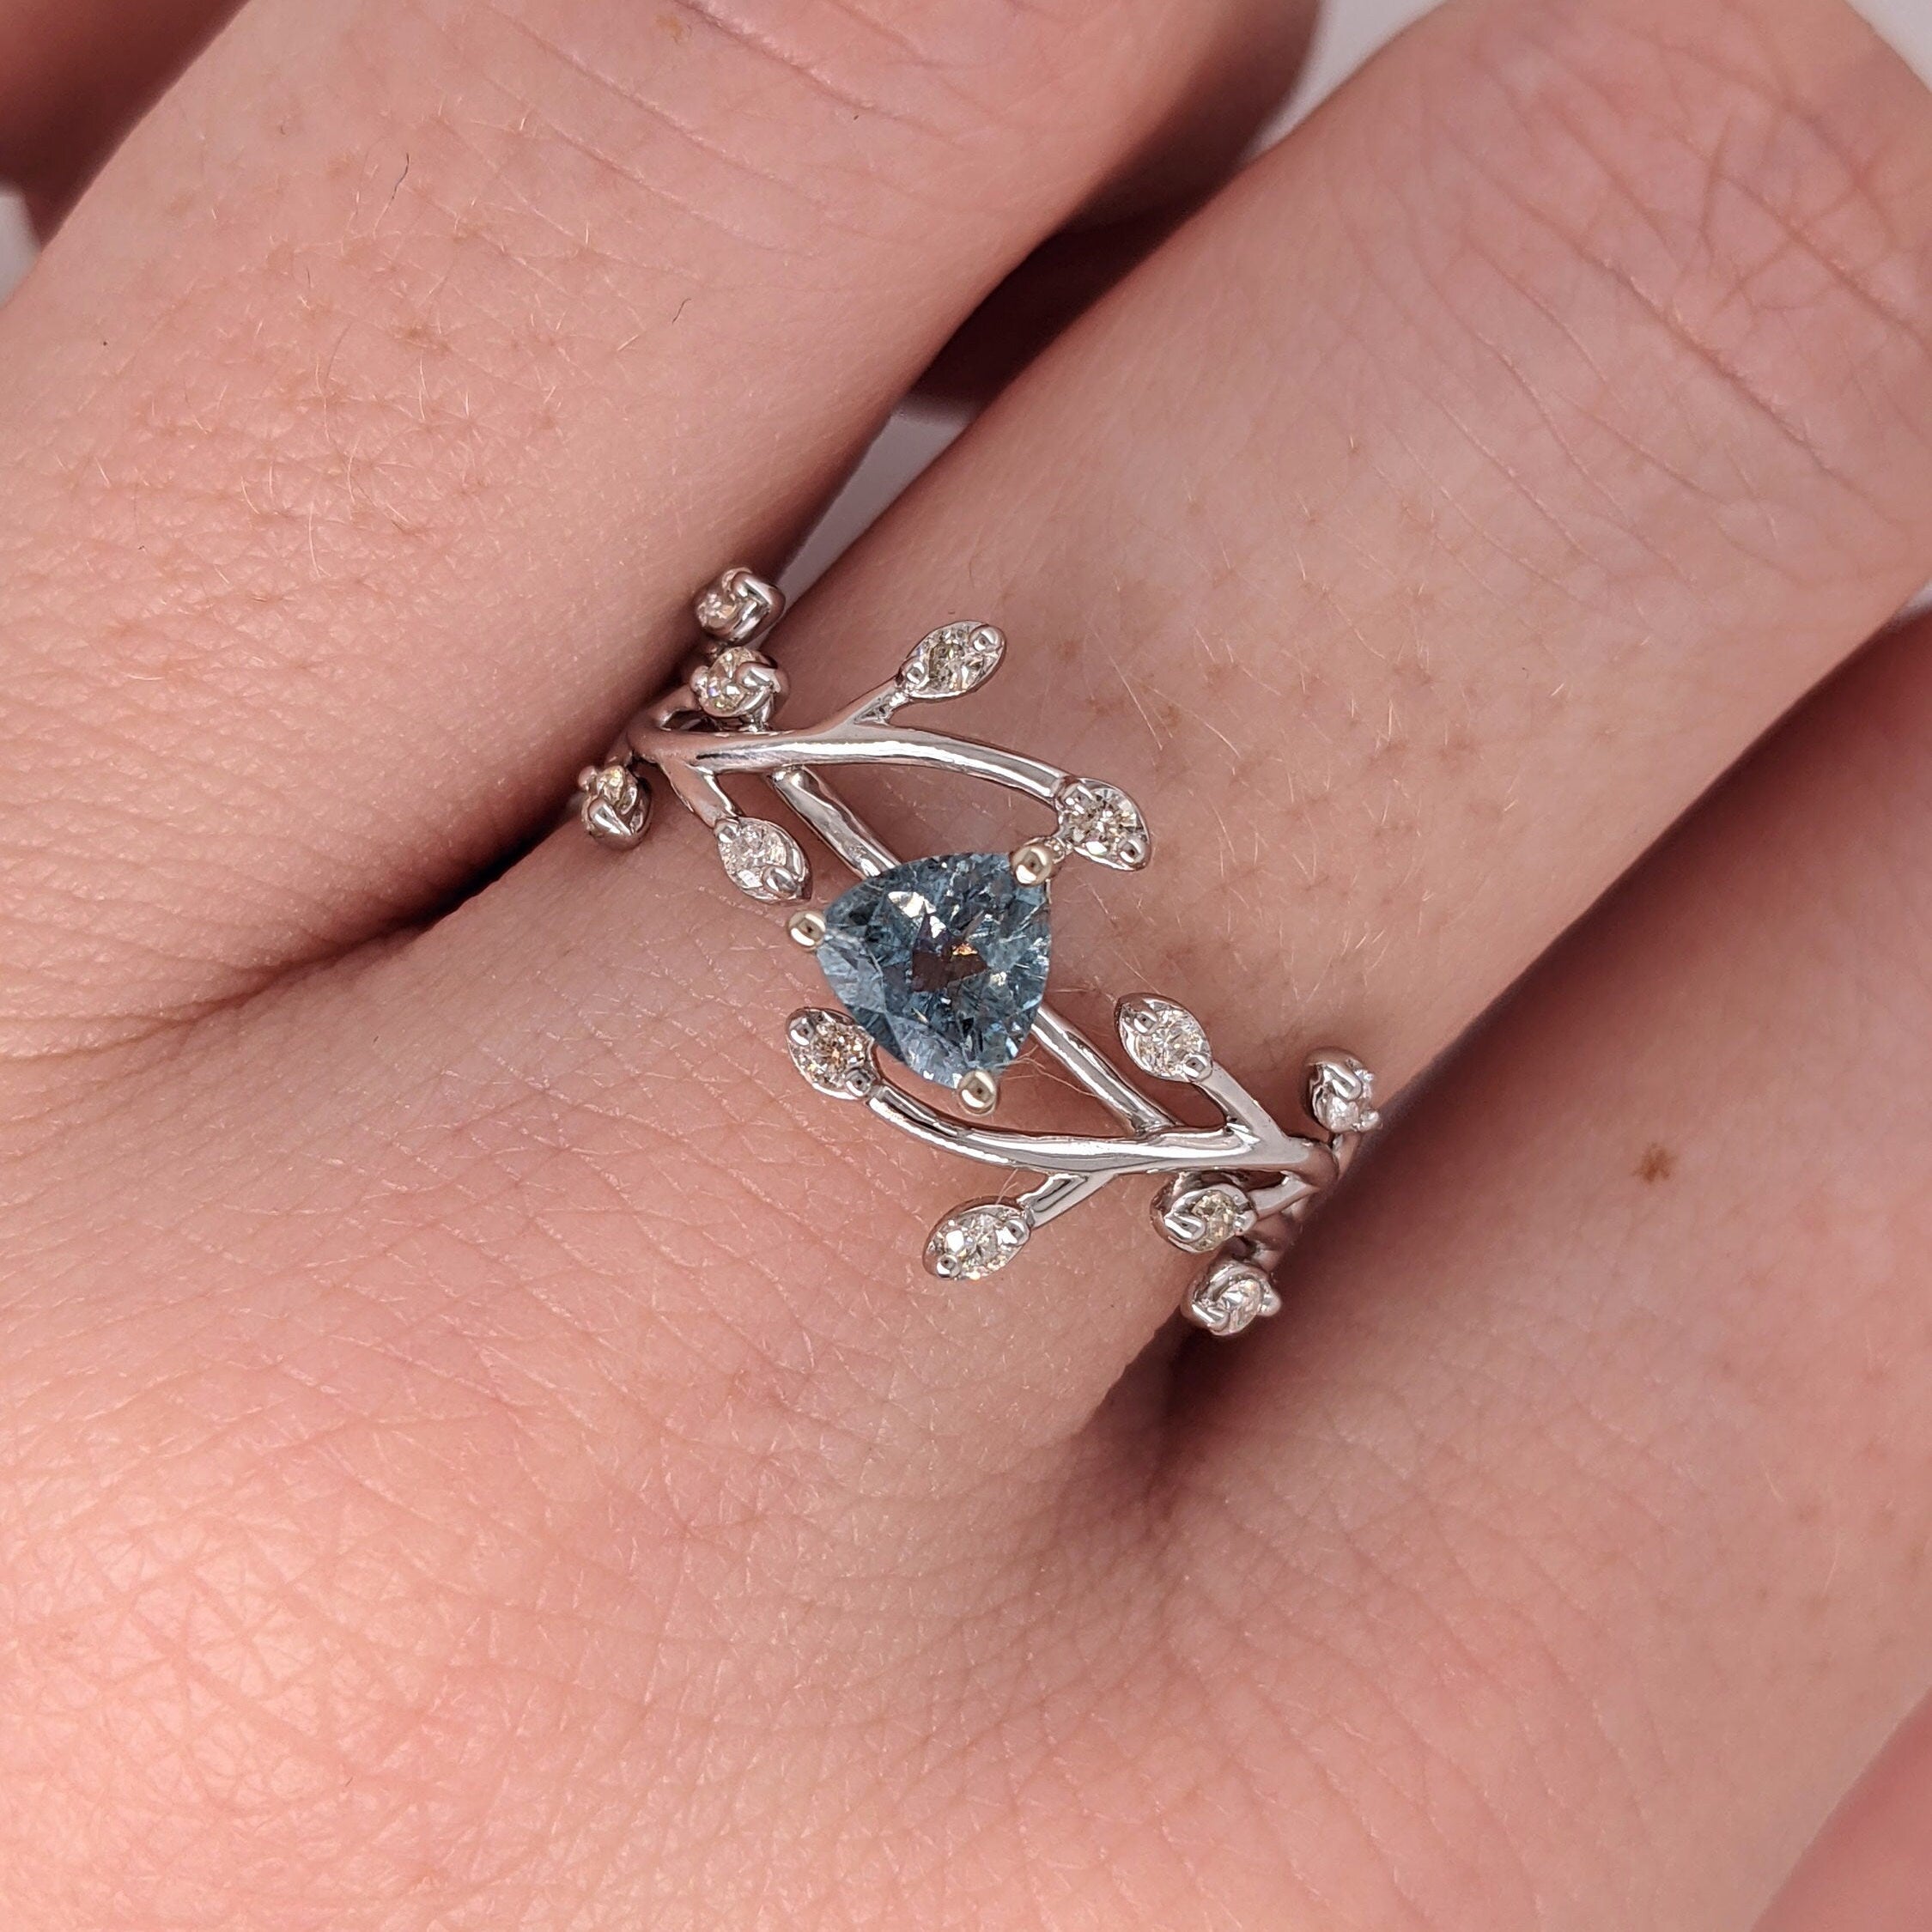 Sky Blue Natural Aquamarine Ring in 14k White Gold w Diamond Accents | Trillion 5.5mm | Elven Vine Ring | Nature Inspired | March Birthstone